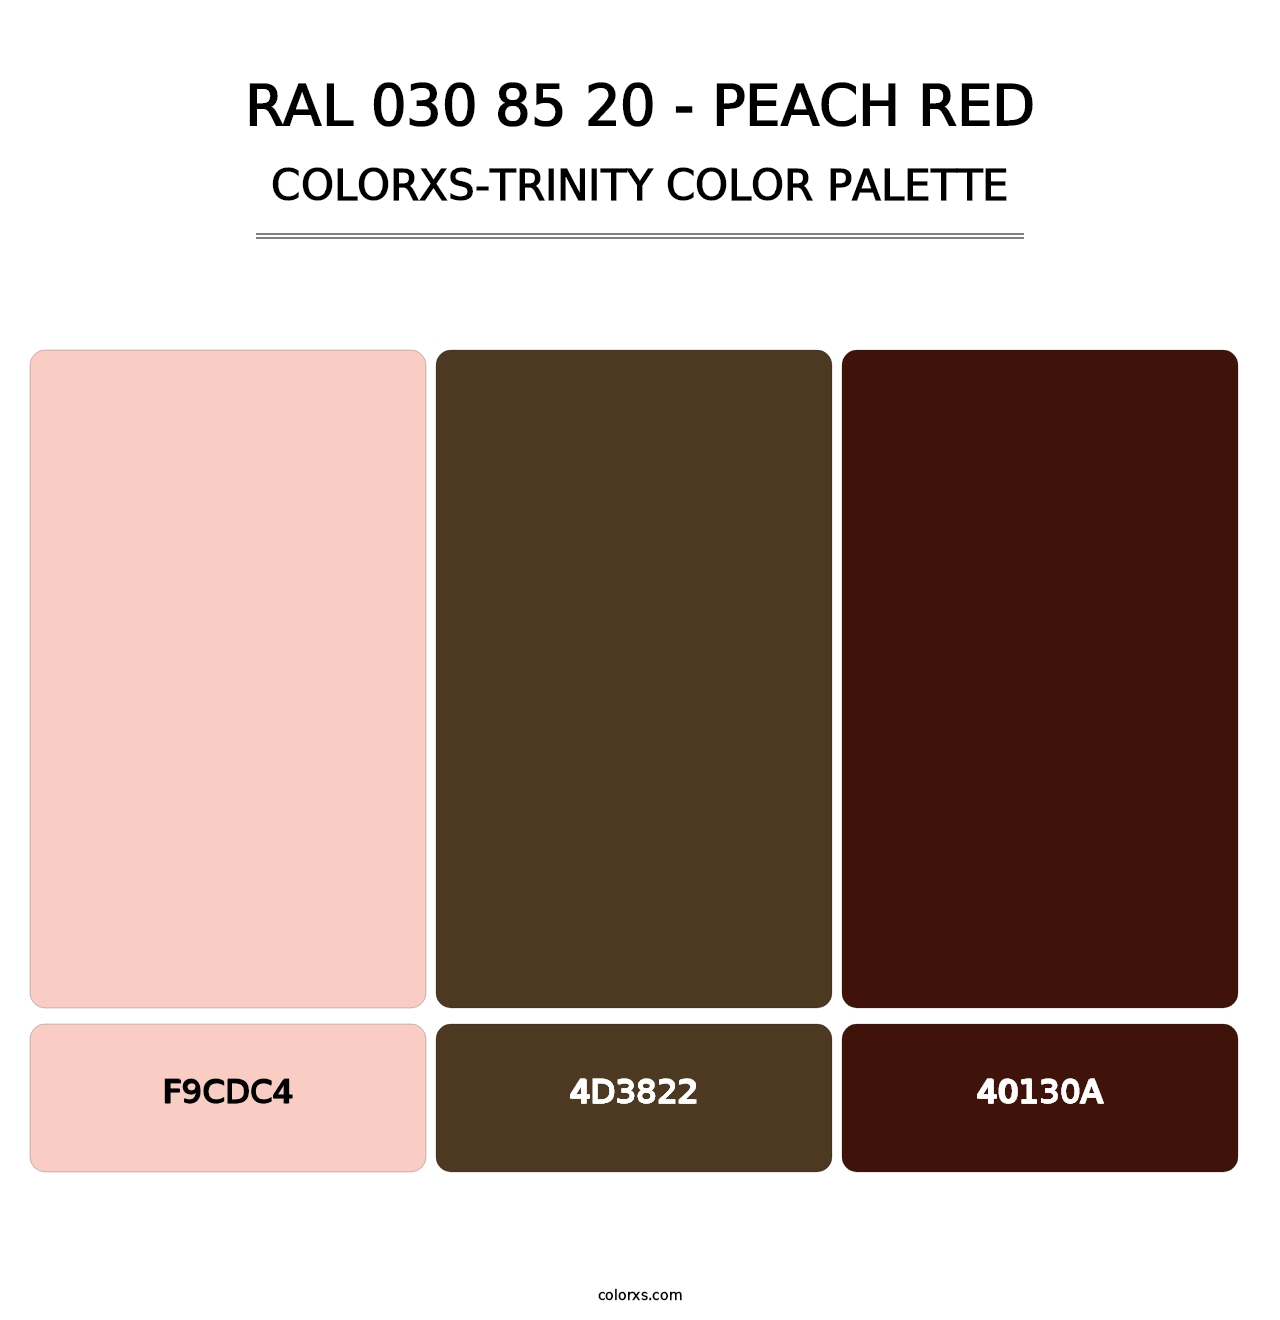 RAL 030 85 20 - Peach Red - Colorxs Trinity Palette